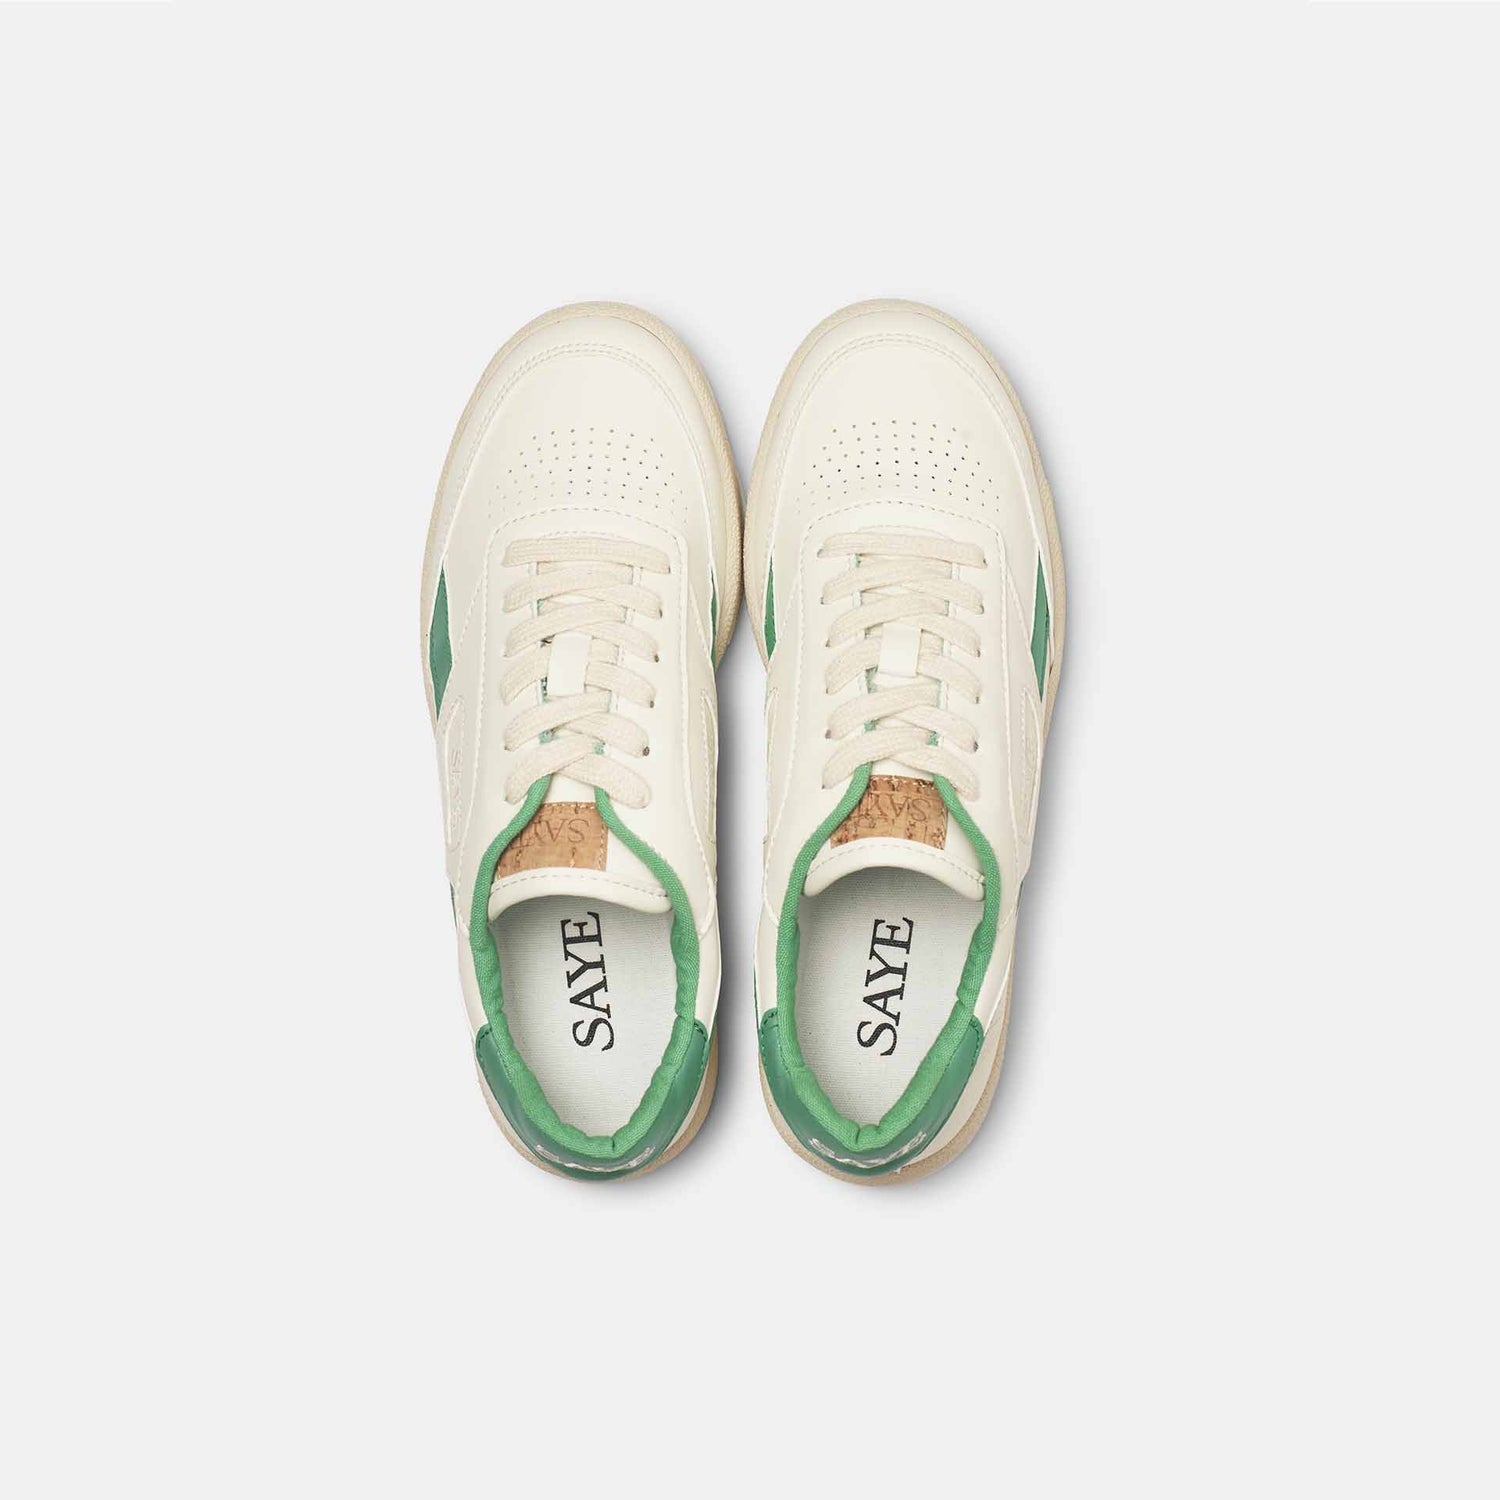 A pair of SAYE Modelo '89 Sneakers - Green, crafted from recycled and organic materials, including vegan Napa. The sneakers are displayed on a white surface.